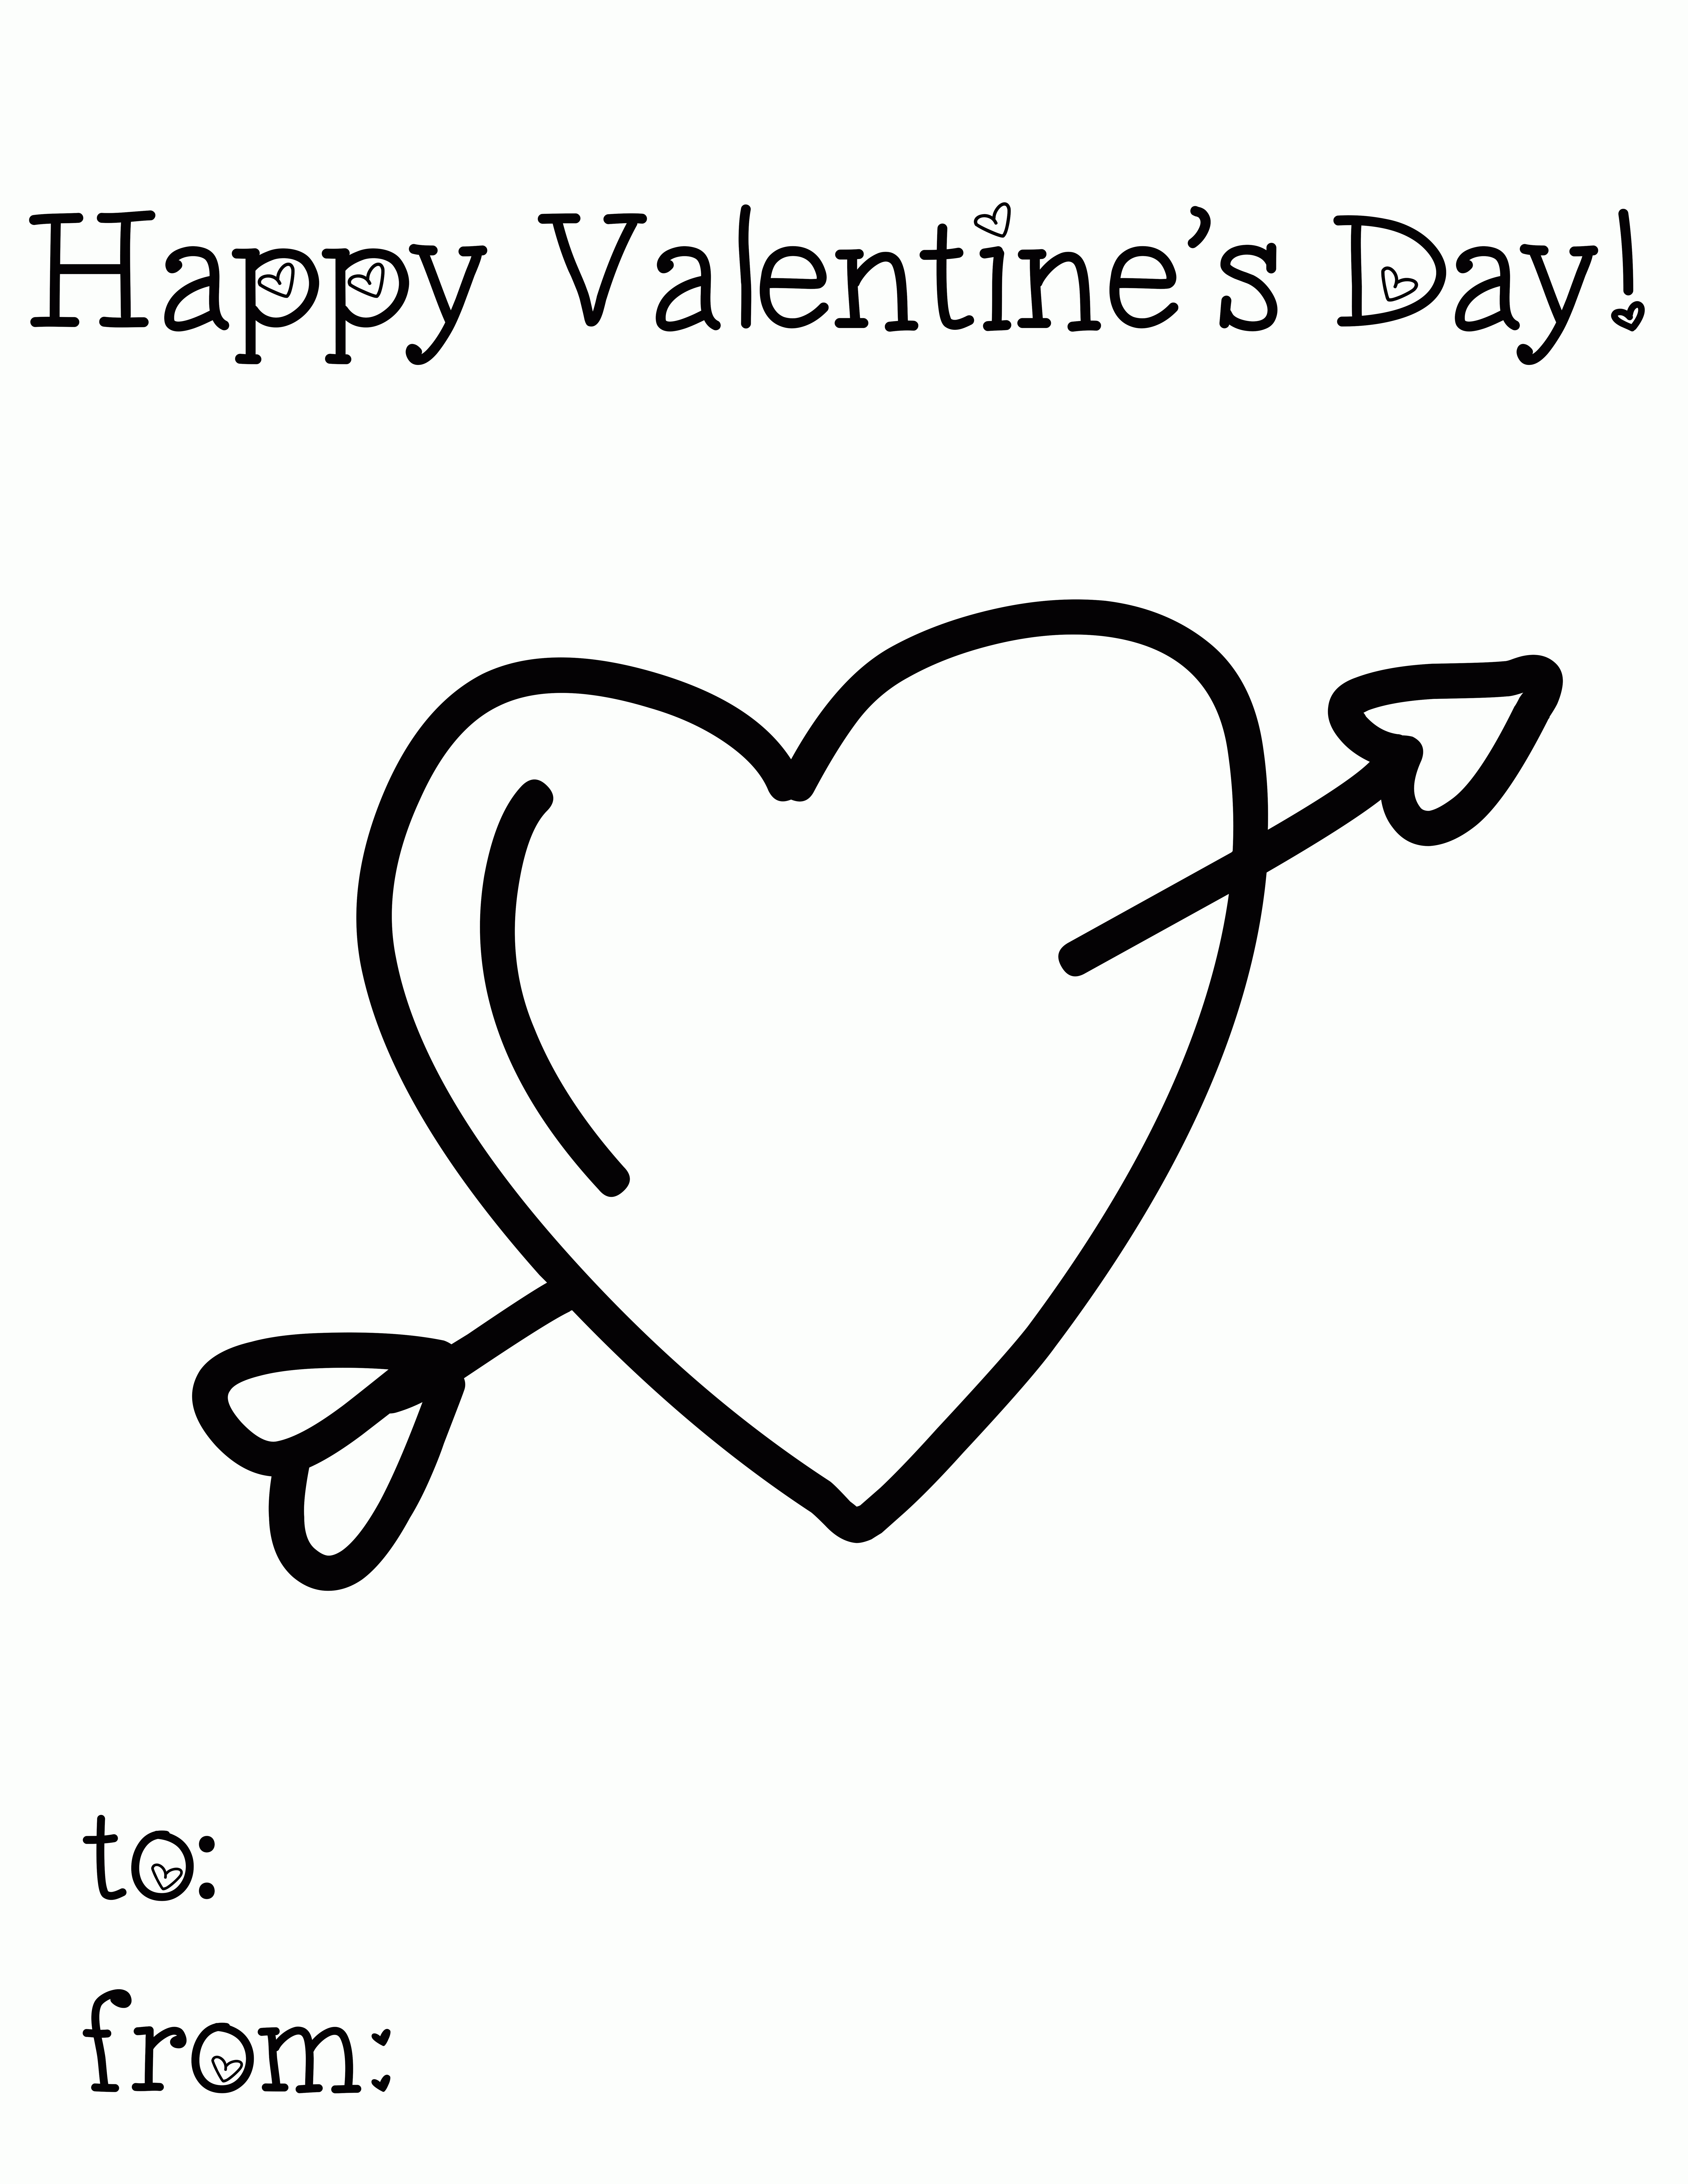 Free Valentine coloring pages for kids - I Heart Nap Time